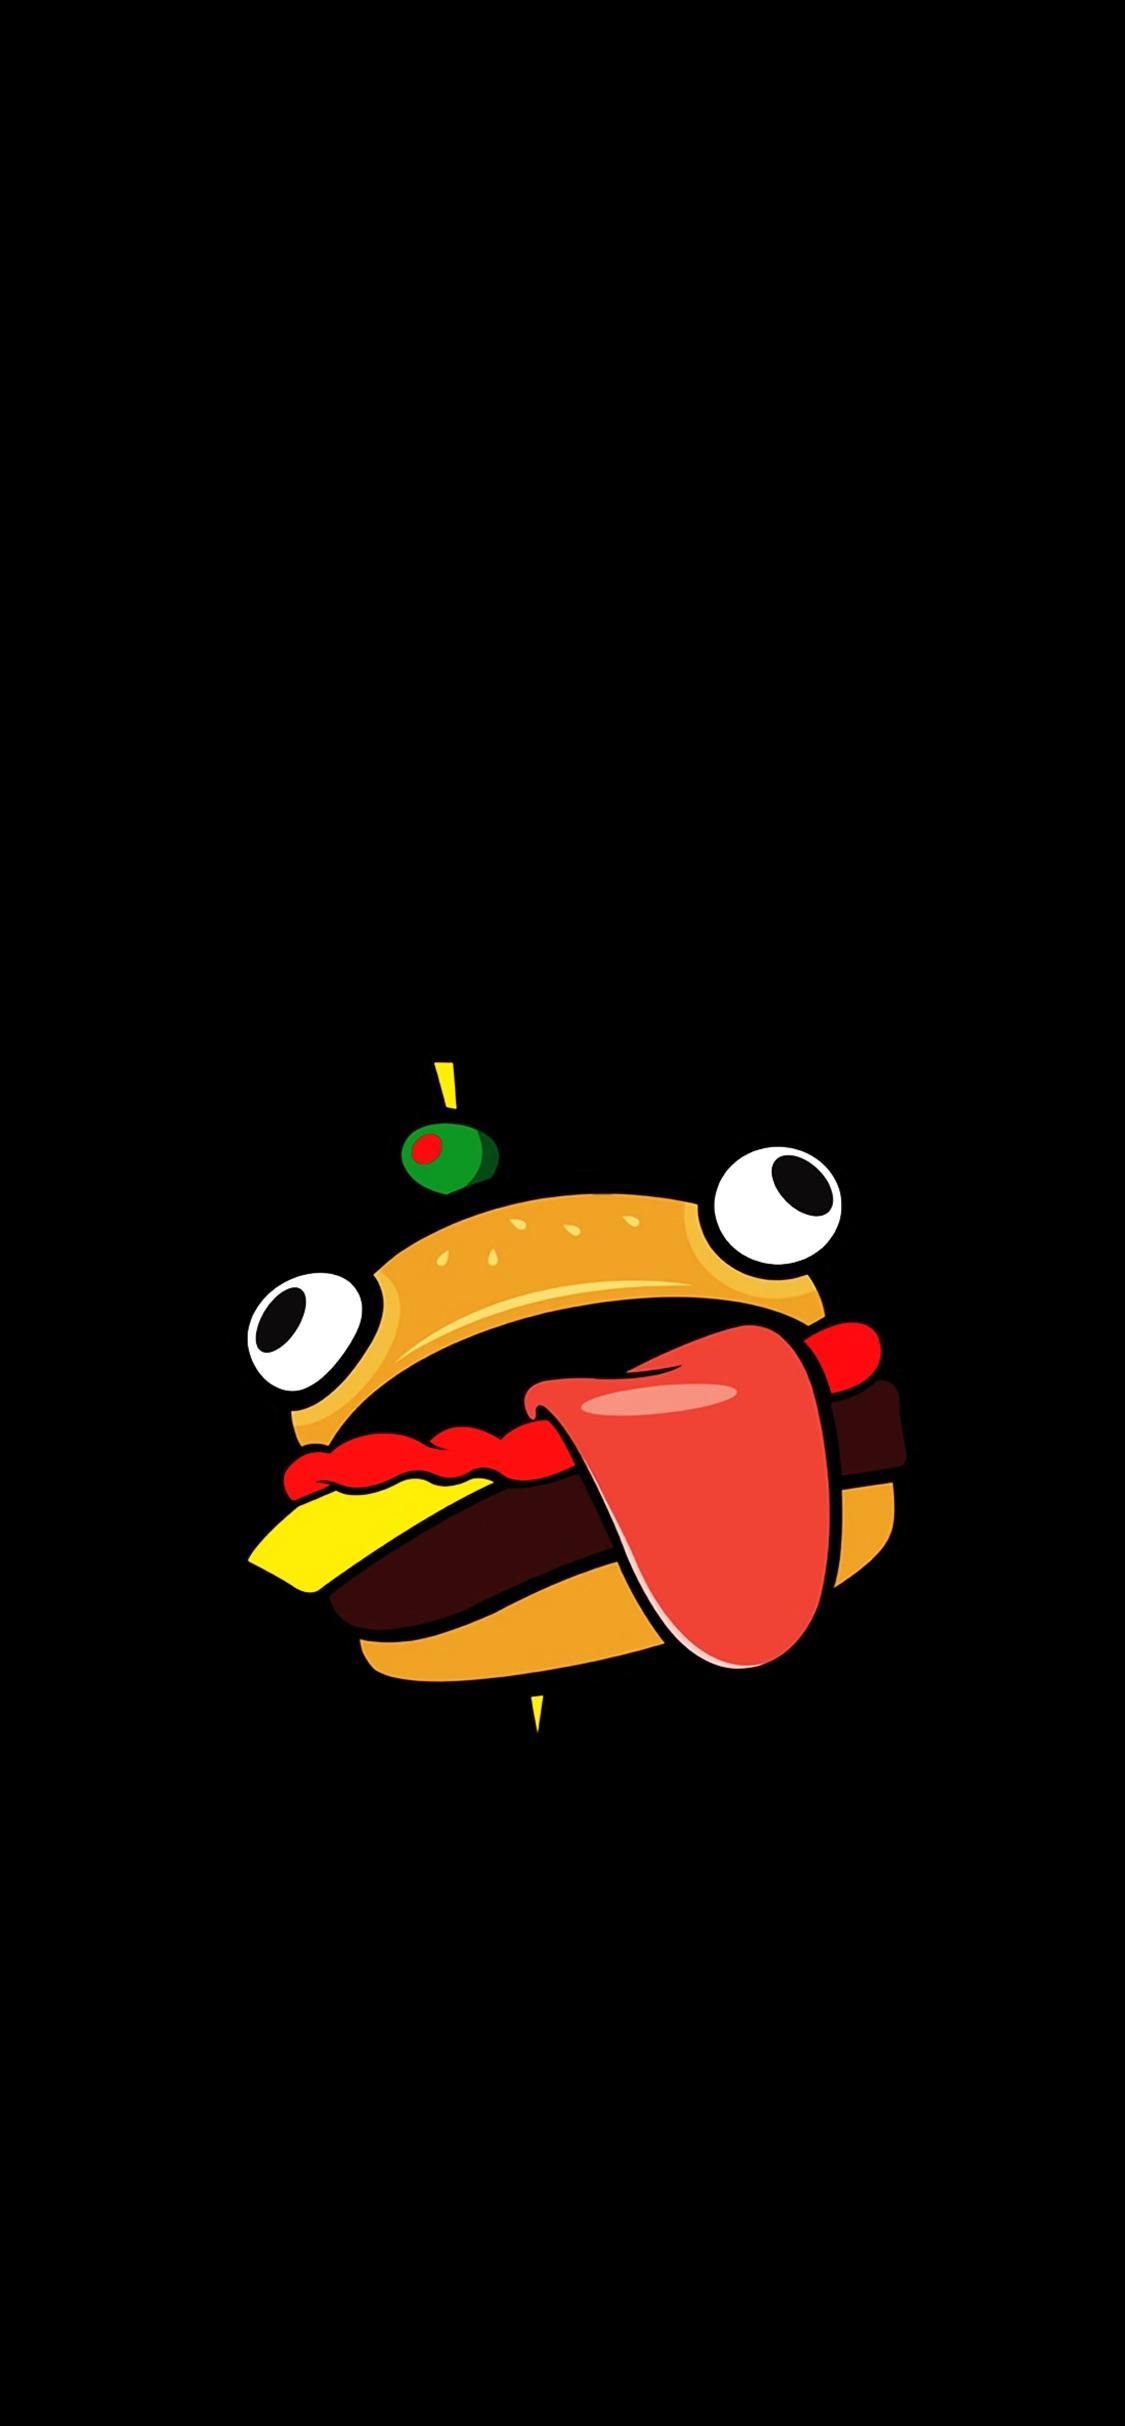 Durr Burger wallpaper I made [1125x2436]. Painting wallpaper, Samsung wallpaper, iPhone wallpaper